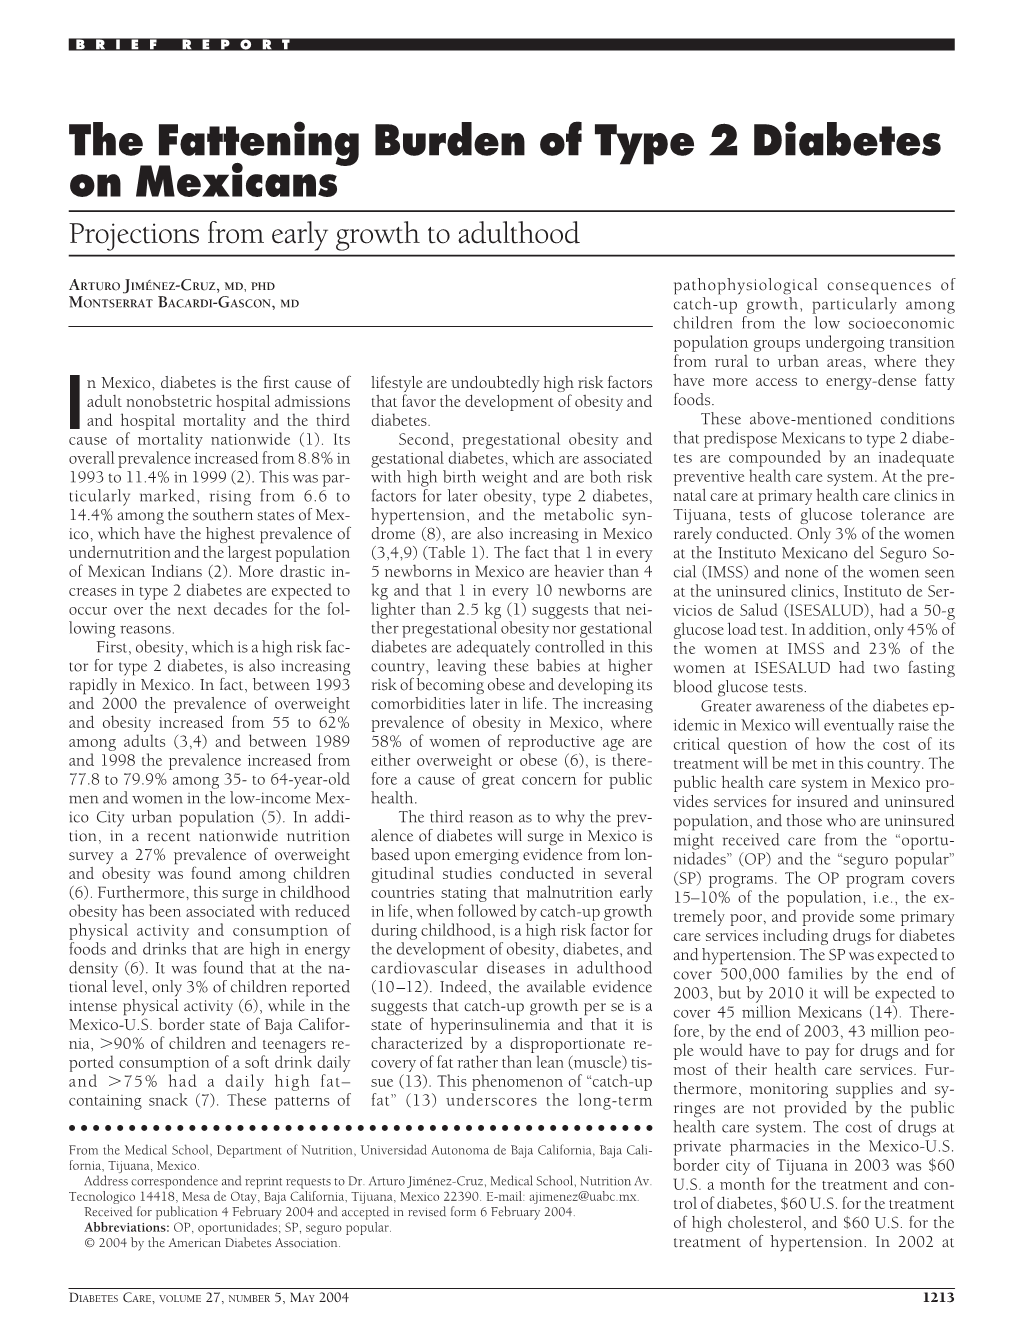 The Fattening Burden of Type 2 Diabetes on Mexicans Projections from Early Growth to Adulthood